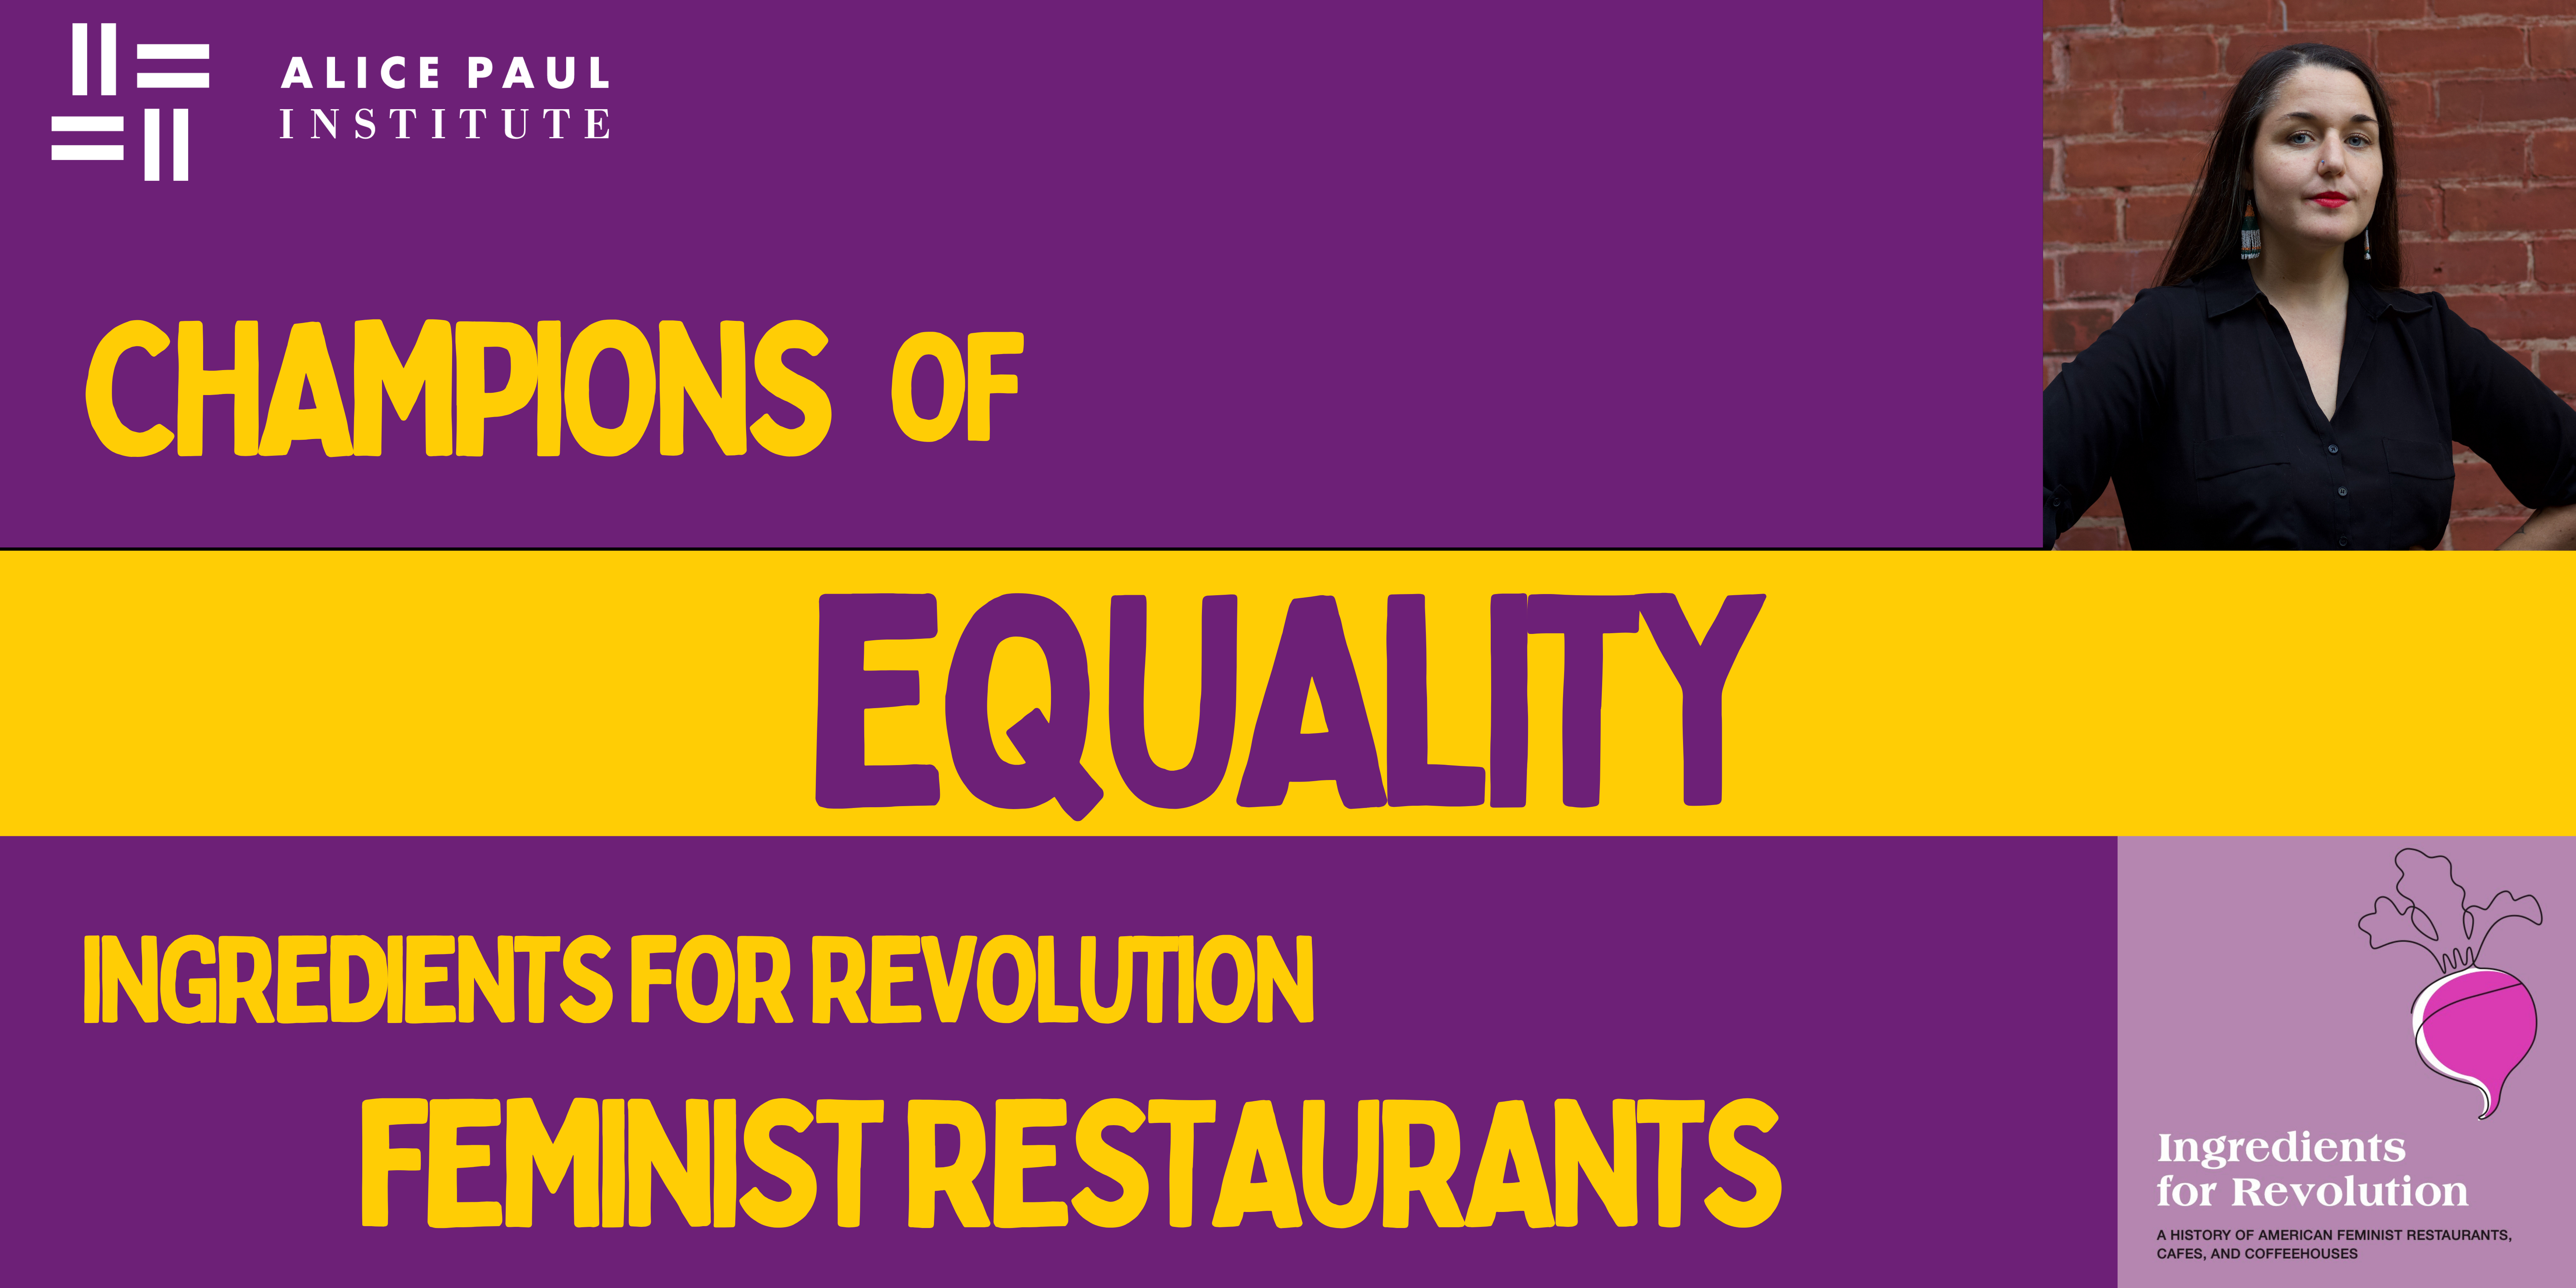 Champions of Equality: Ingredients for Revolution